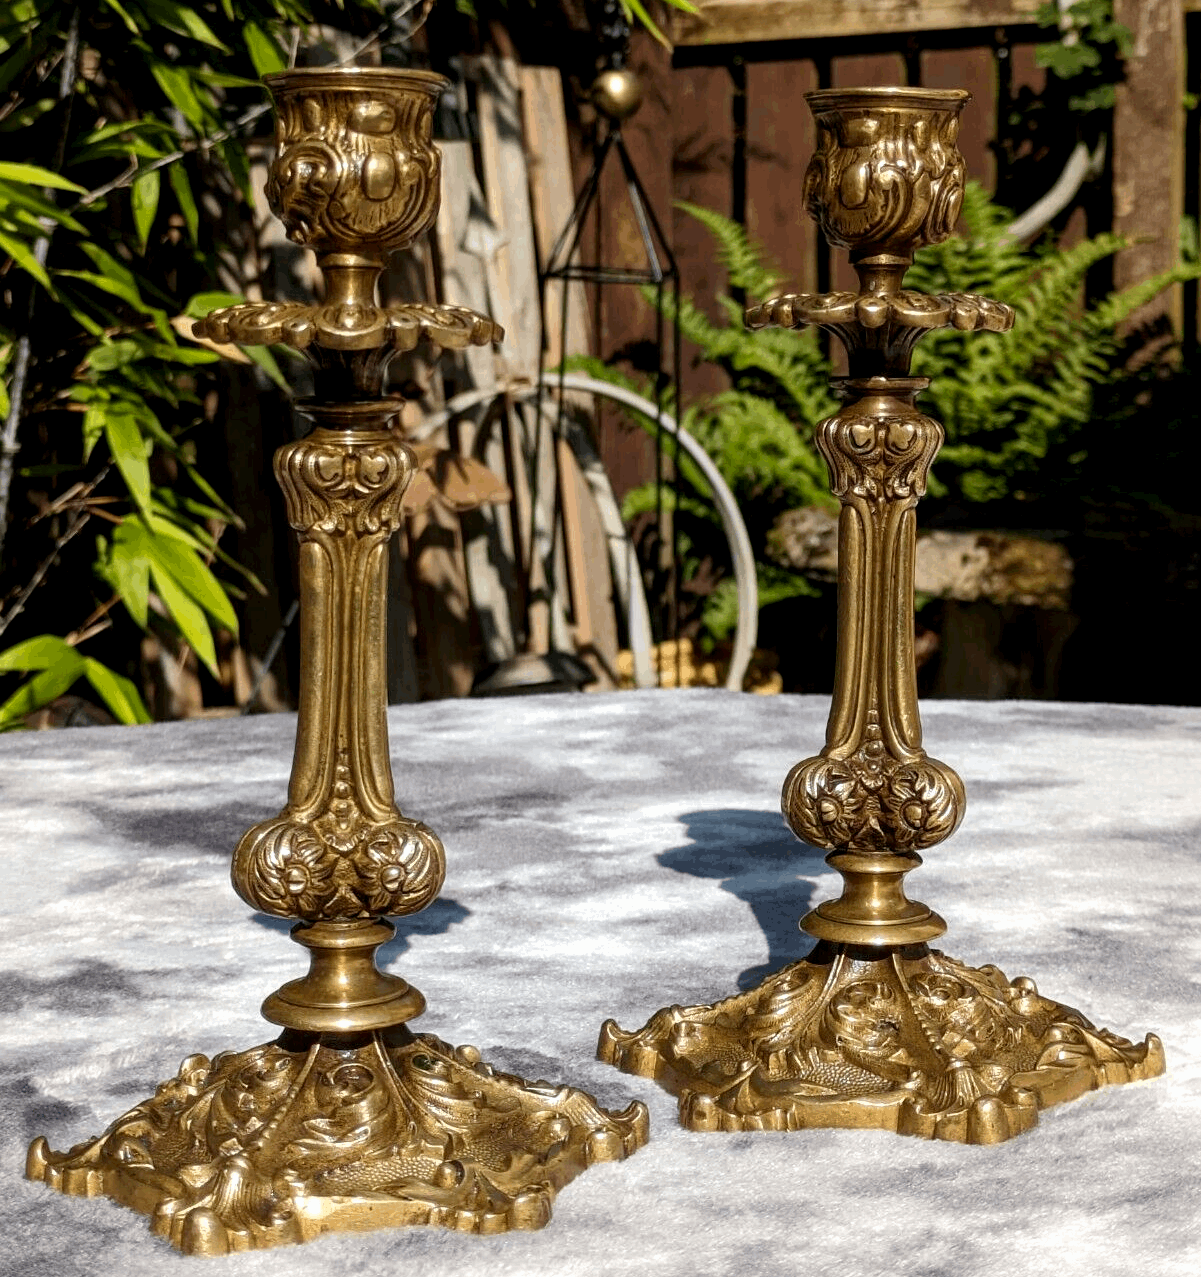 19th Century Antique Pair of Ornate Rococo Brass Candlestick Holders - 20.5 cm